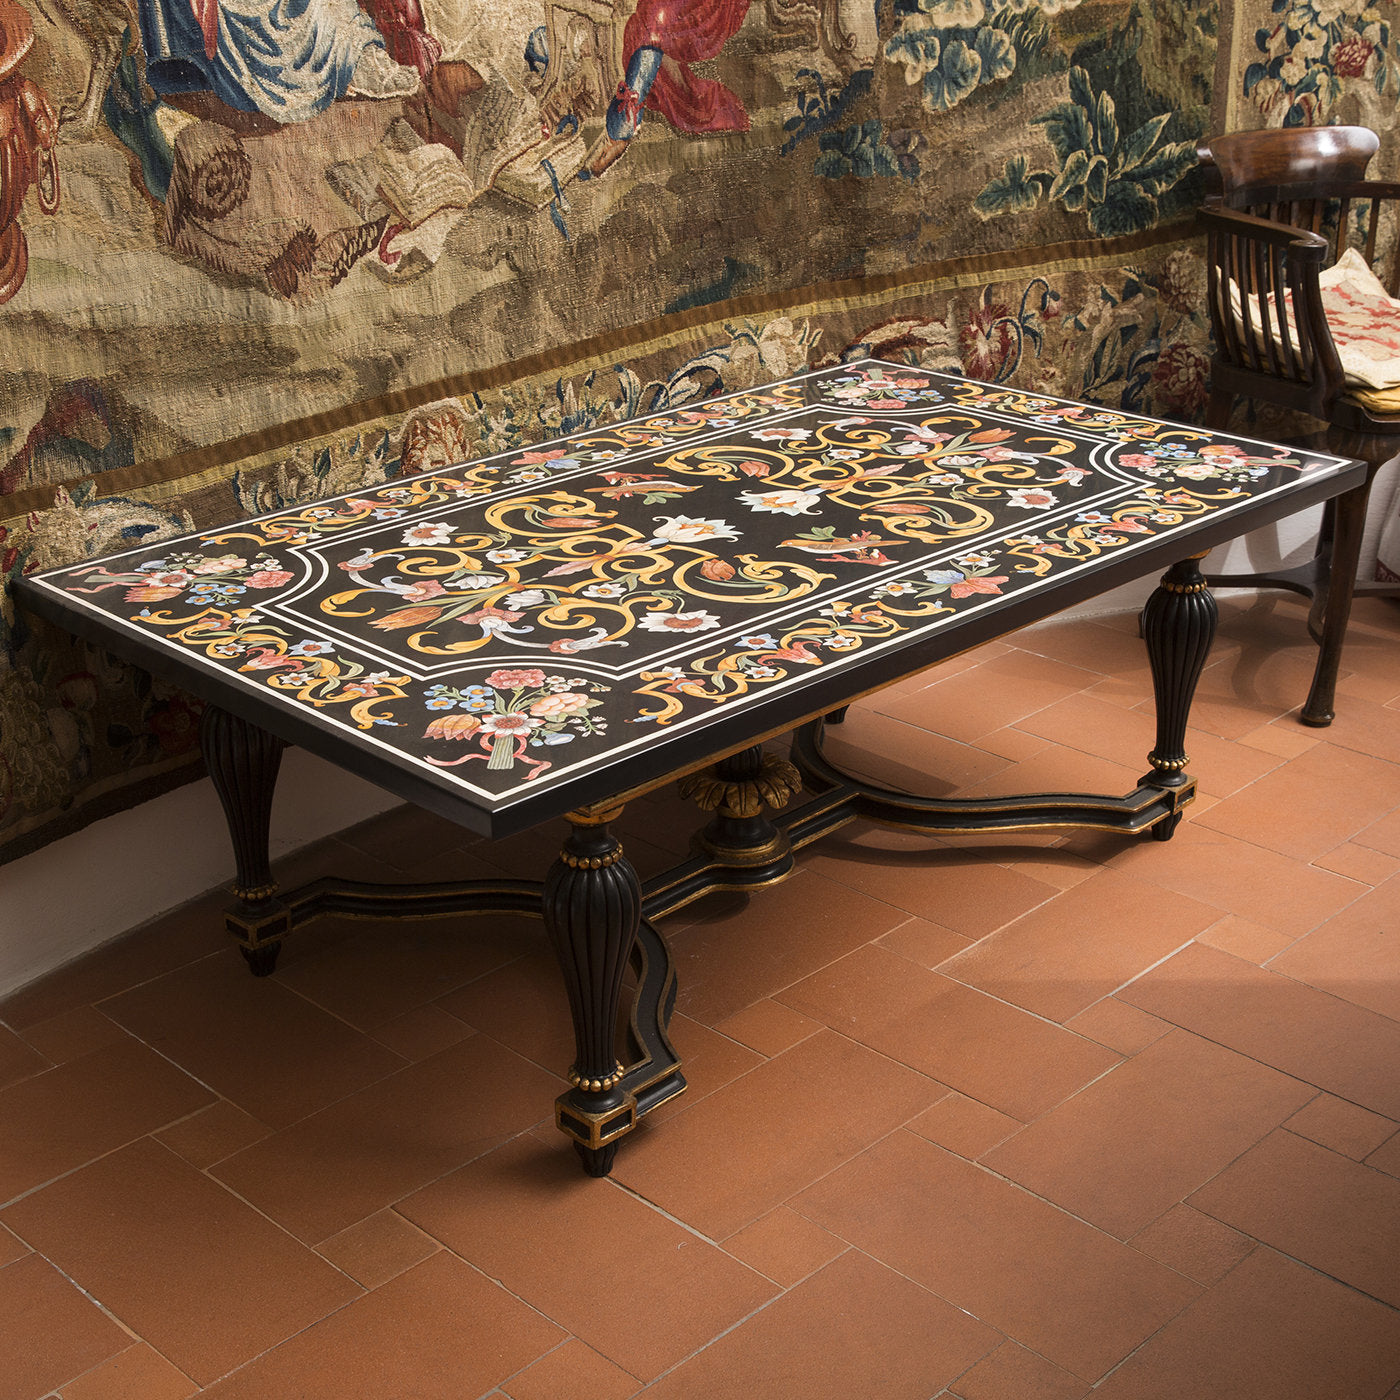 Settecento Marble Inlay Table - Alternative view 4